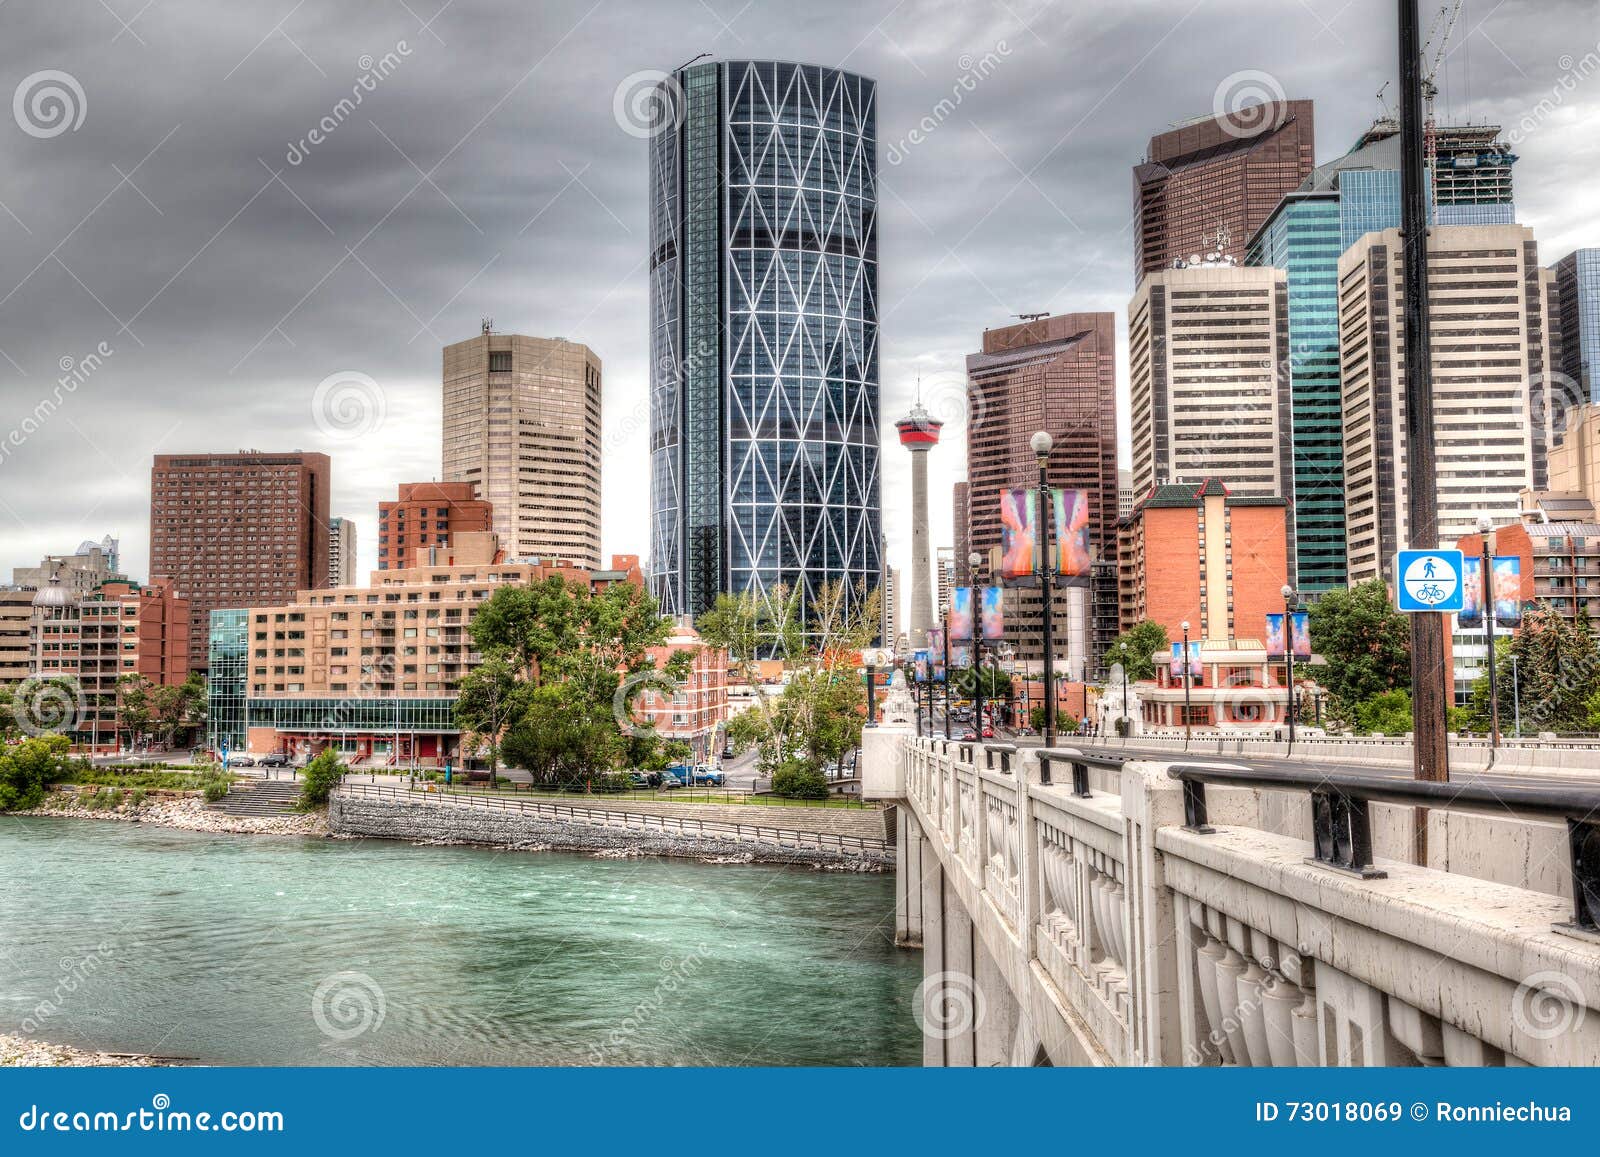 calgary downtown in hdr